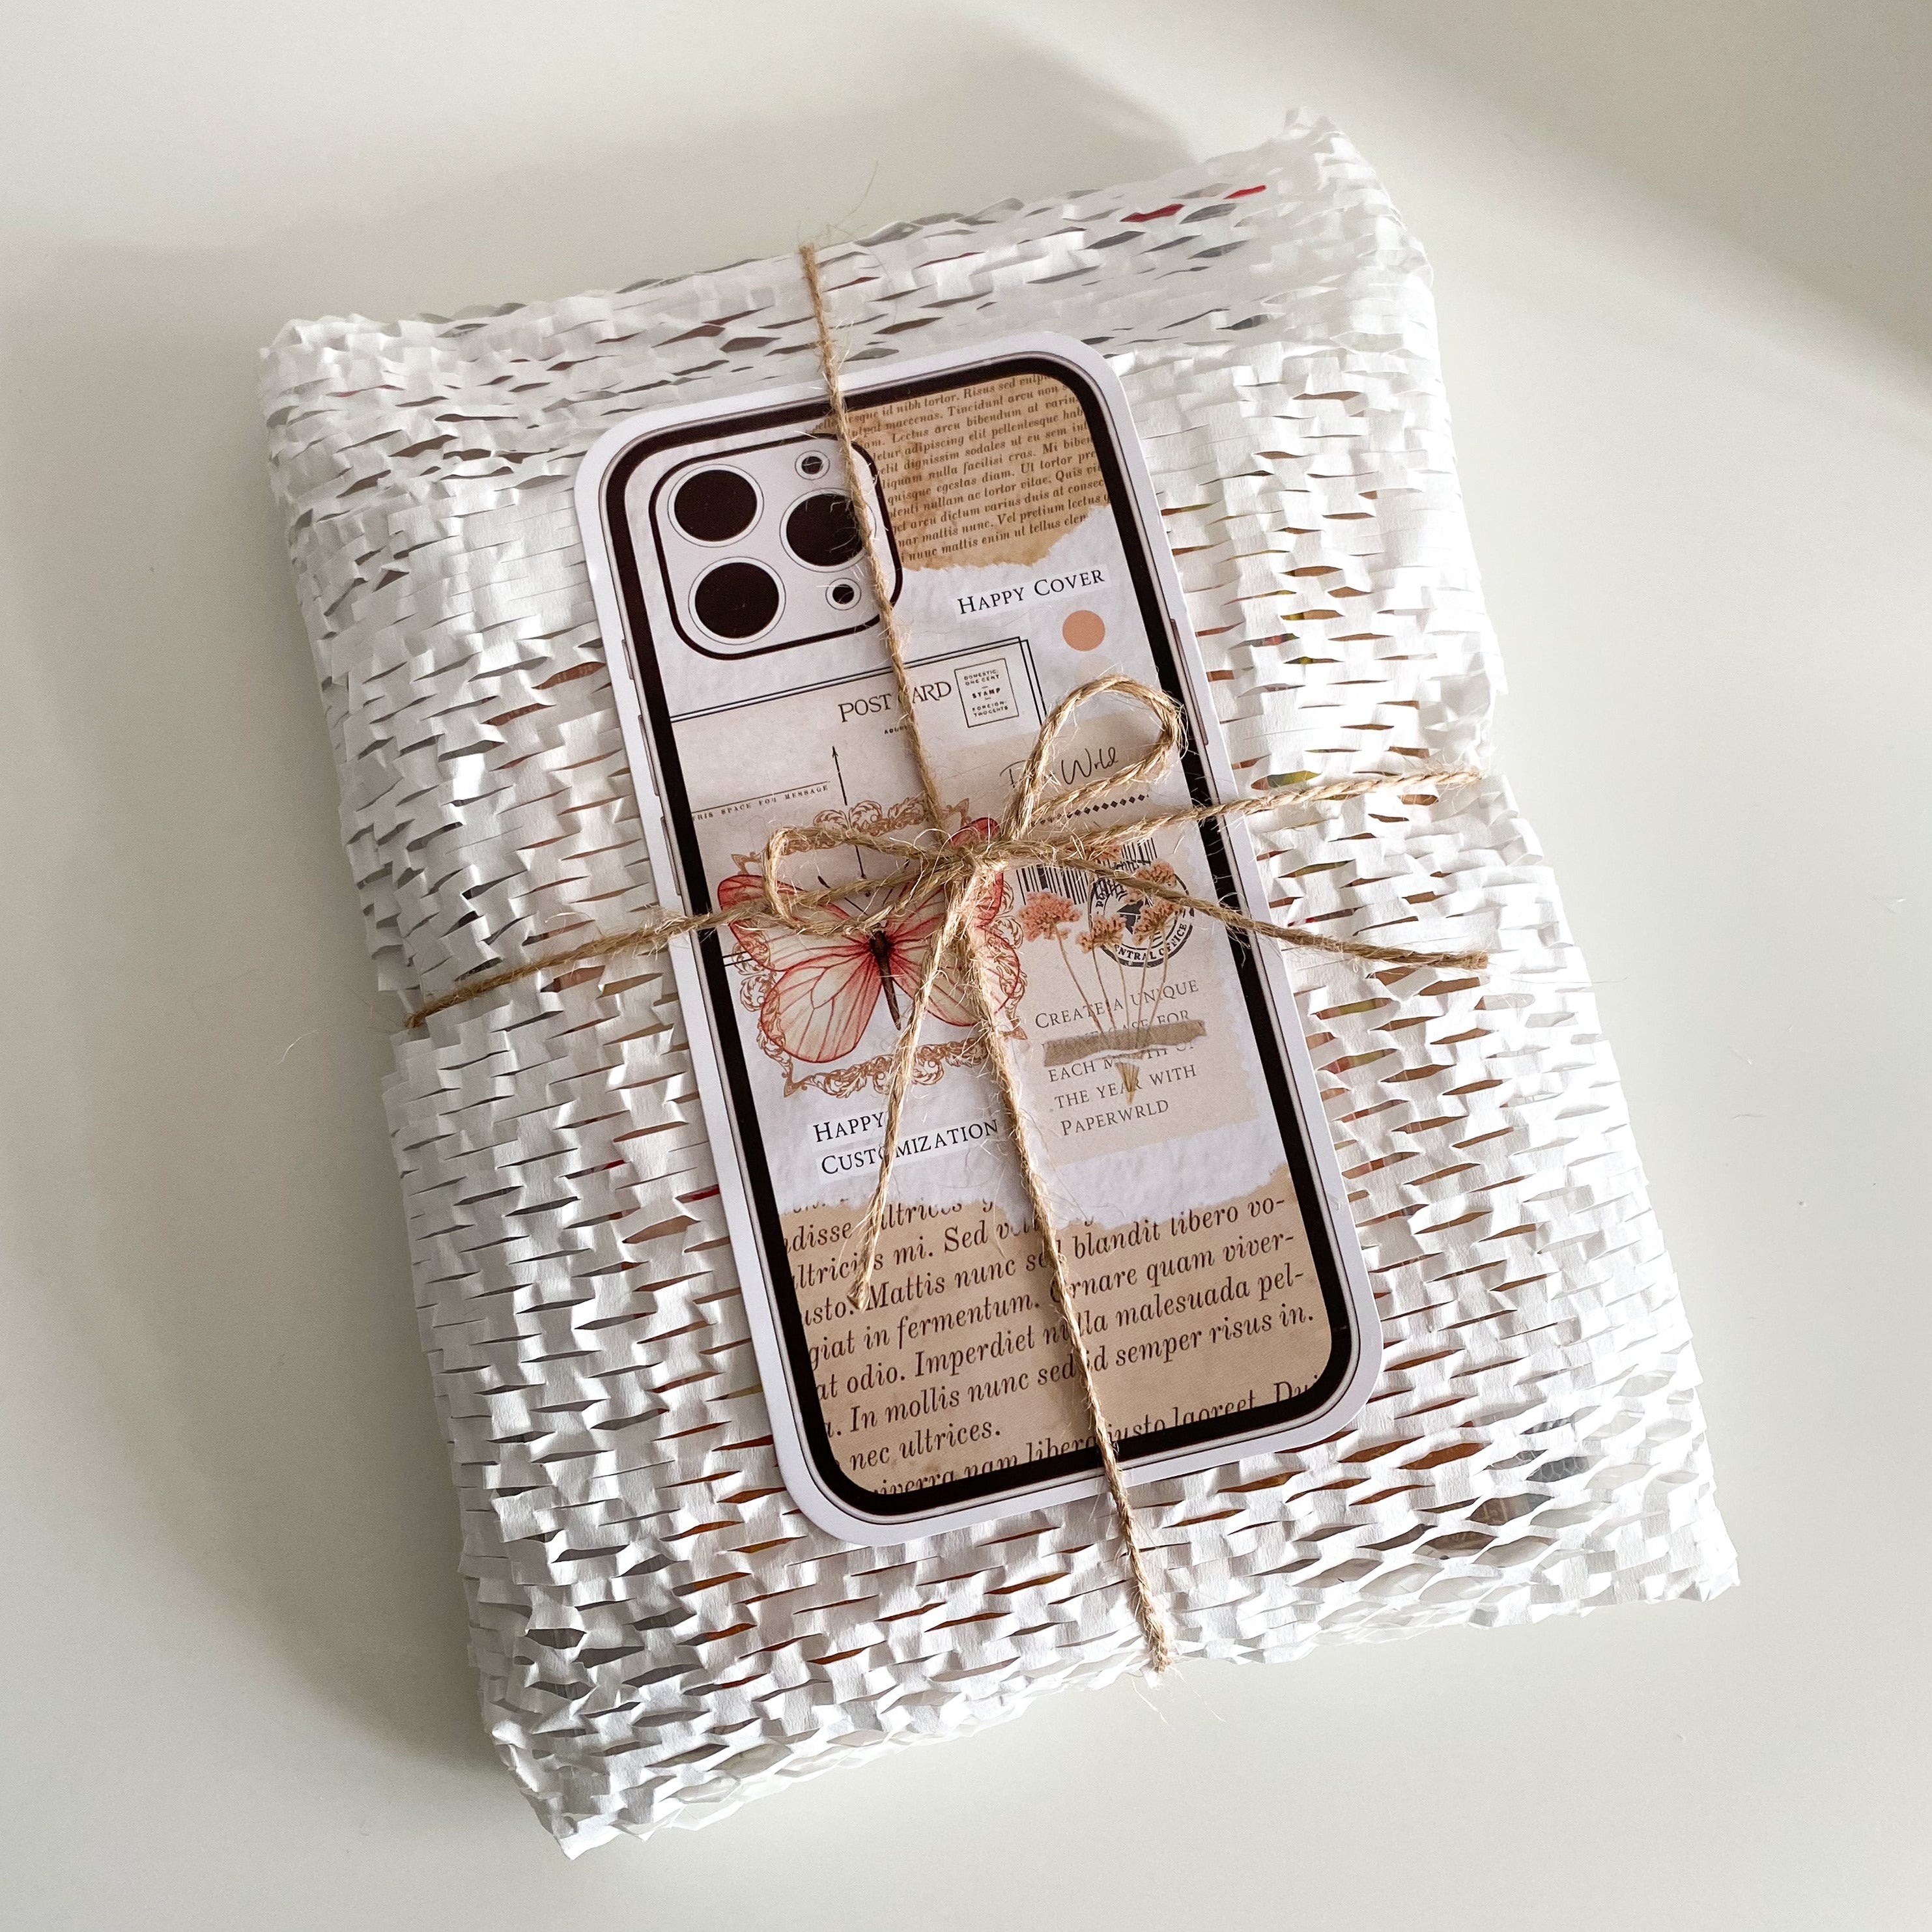 DIY Phone Case Winter Box - Personalize Your Phone for Journaling &amp; Scrapbooking - PaperWrld